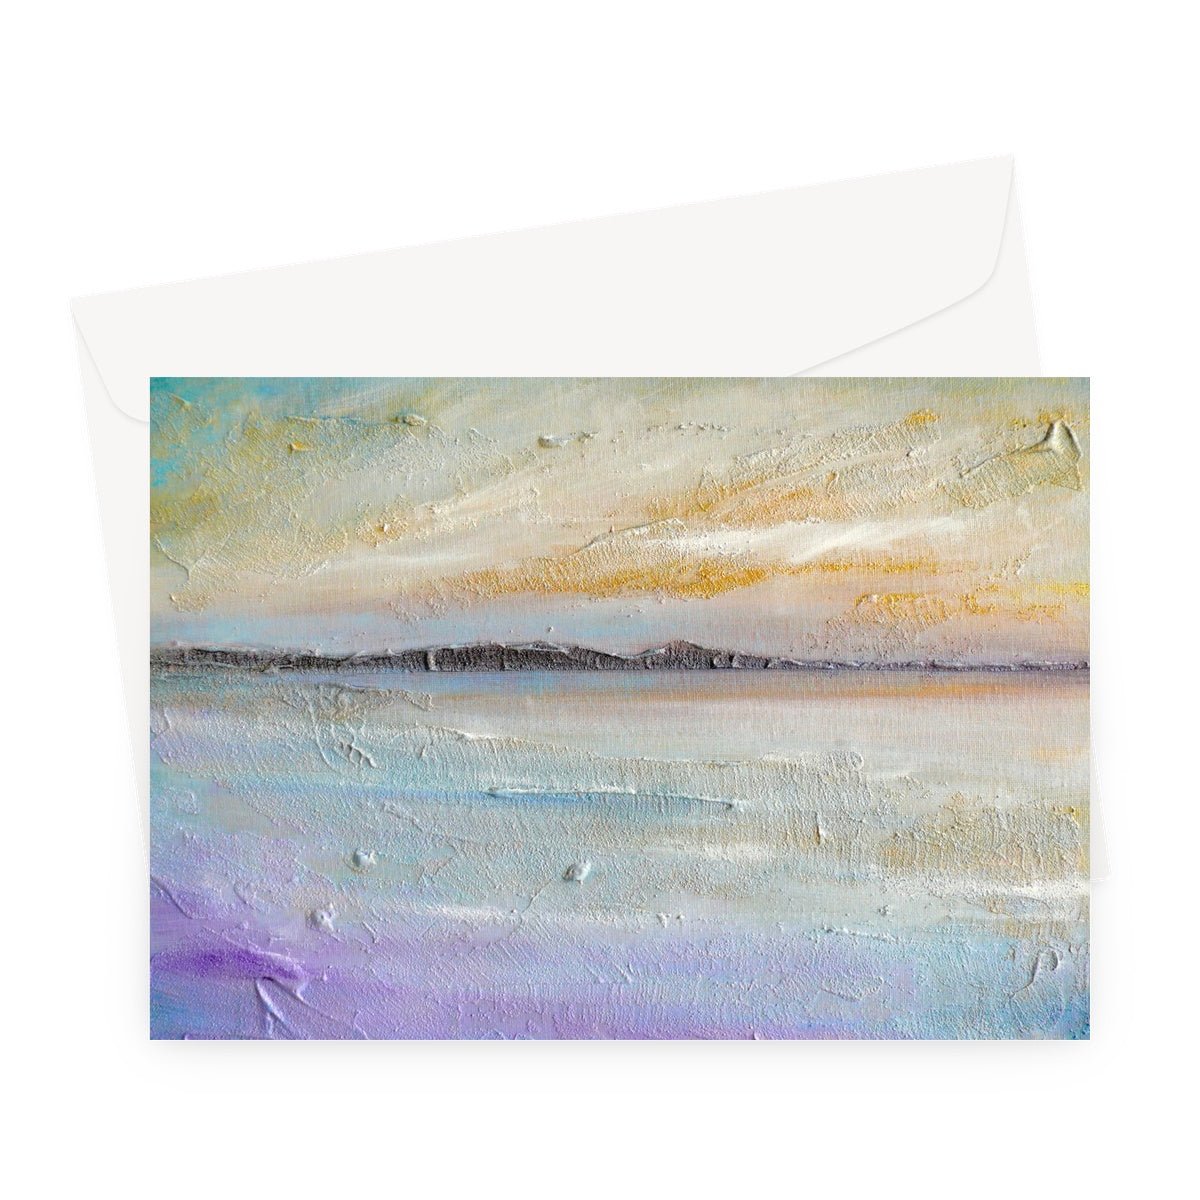 Sollas Beach South Uist Art Gifts Greeting Card-Greetings Cards-Hebridean Islands Art Gallery-A5 Landscape-10 Cards-Paintings, Prints, Homeware, Art Gifts From Scotland By Scottish Artist Kevin Hunter